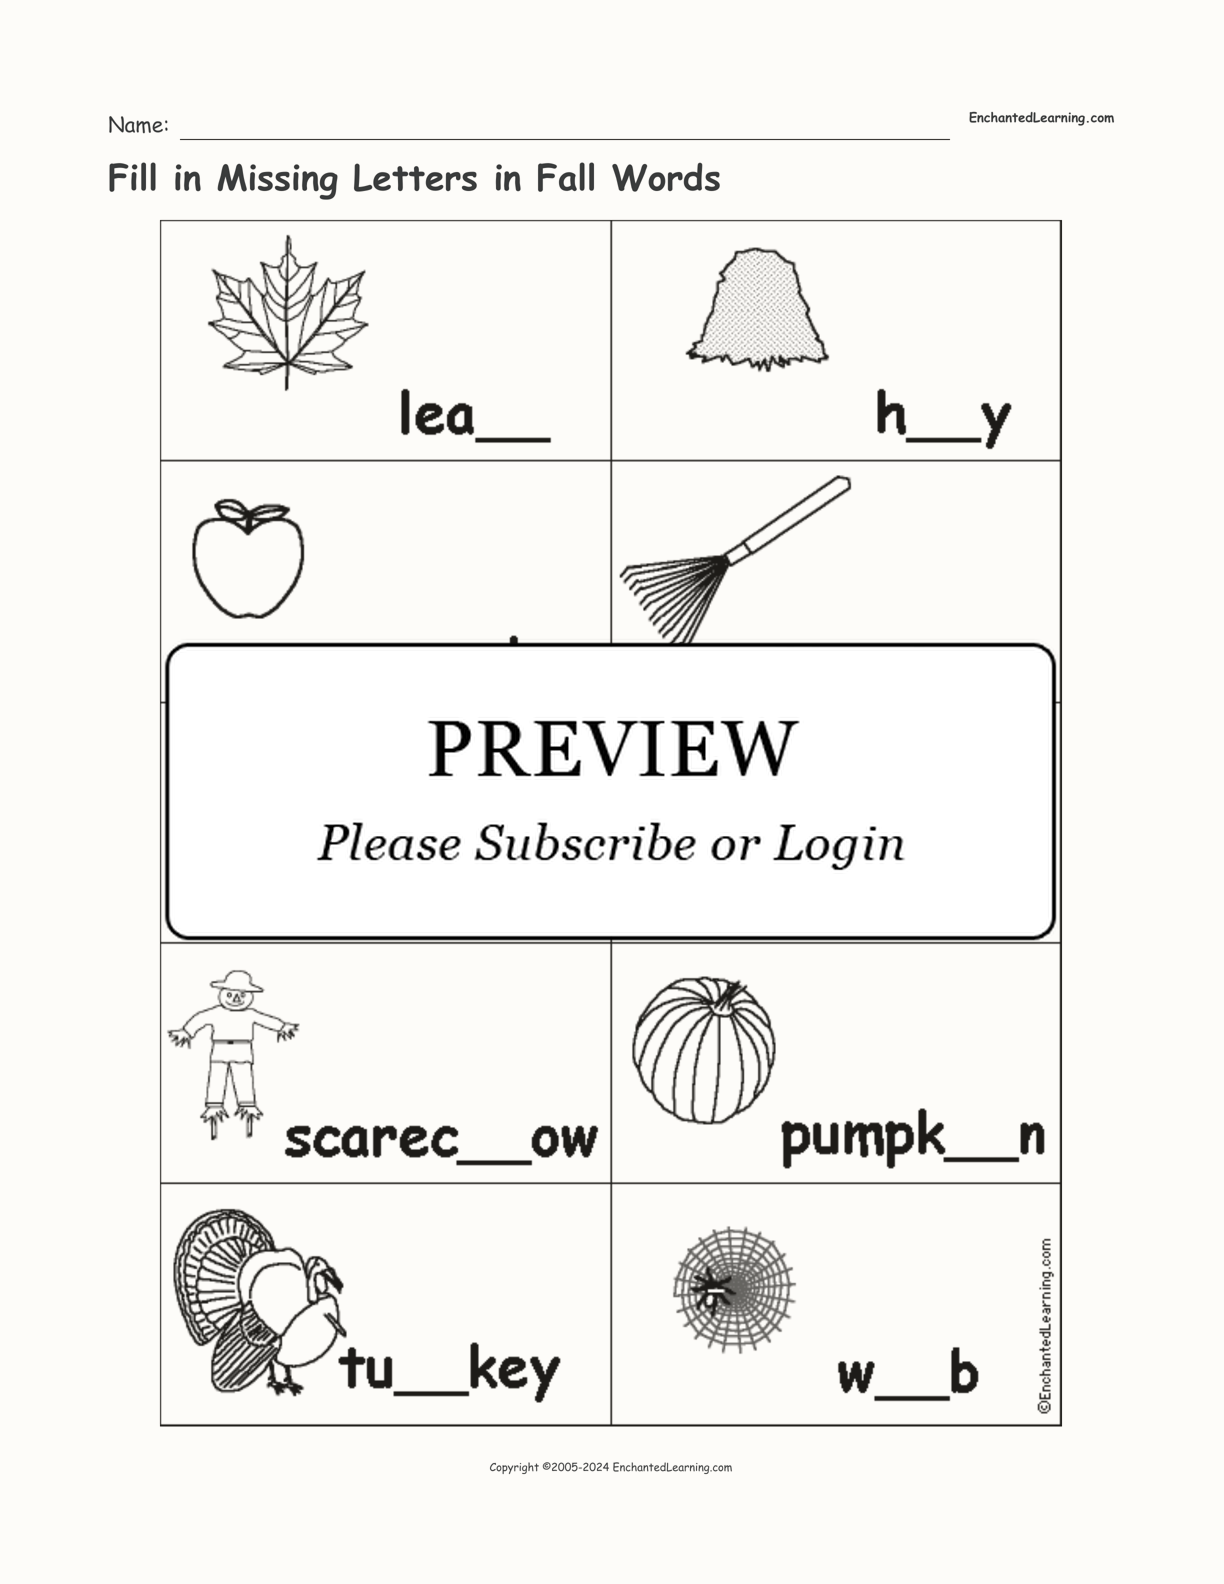 Fill in Missing Letters in Fall Words interactive worksheet page 1